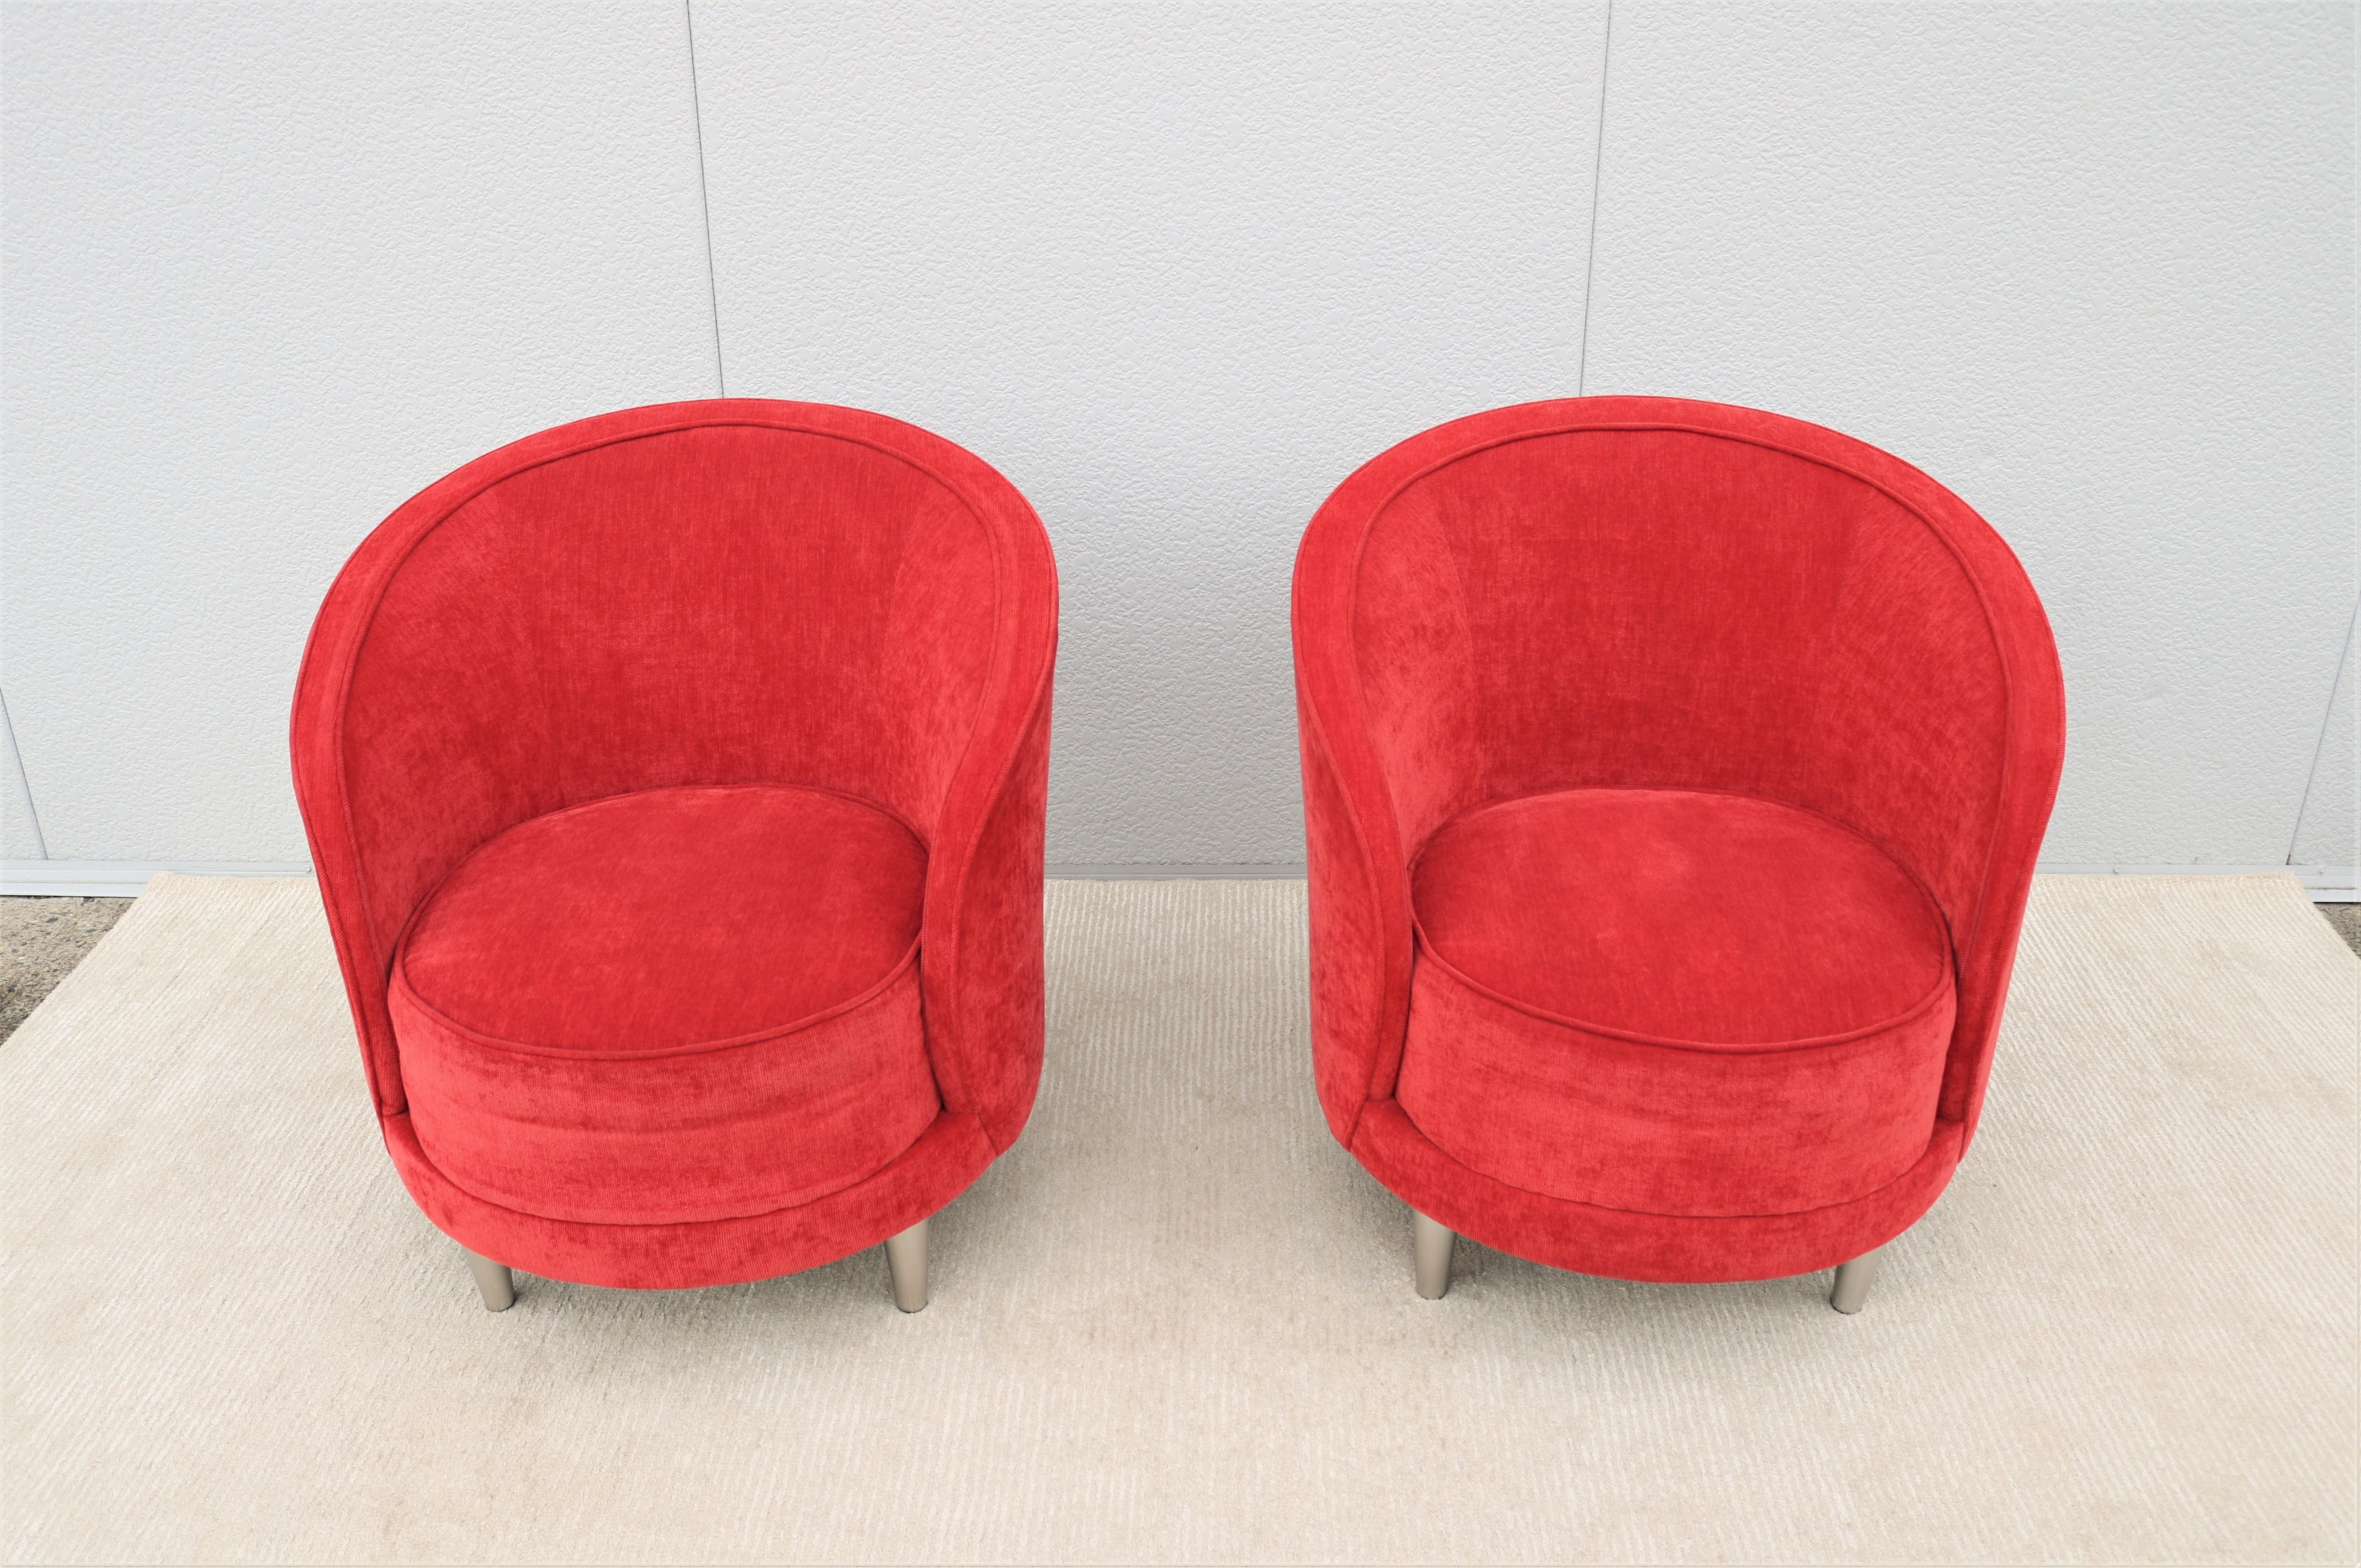 Contemporary Modern Martin Brattrud Kinsale Red Barrel Lounge Chairs, a Pair For Sale 5